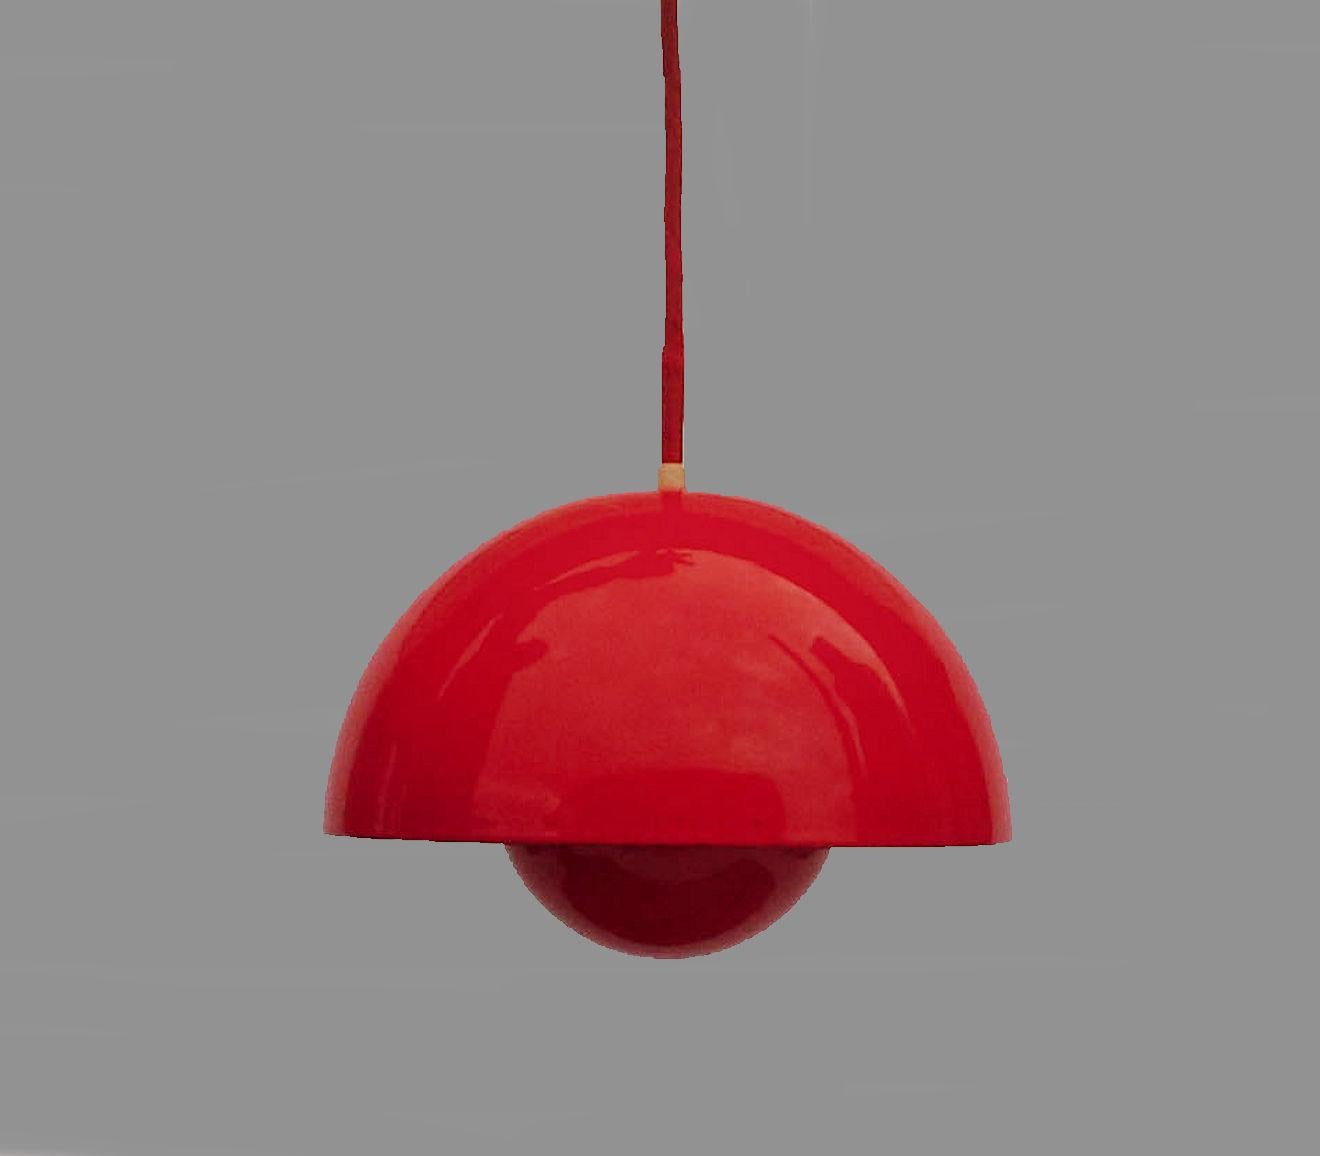 Verner Panton flowerpot pendant light designed for Louis Poulsen in 1969.

This pendant is an early example of the Panton flowerpot model and feature a red enamel lampshade. 

The lamp consists of two semi-circular spheres facing each other.

Verner